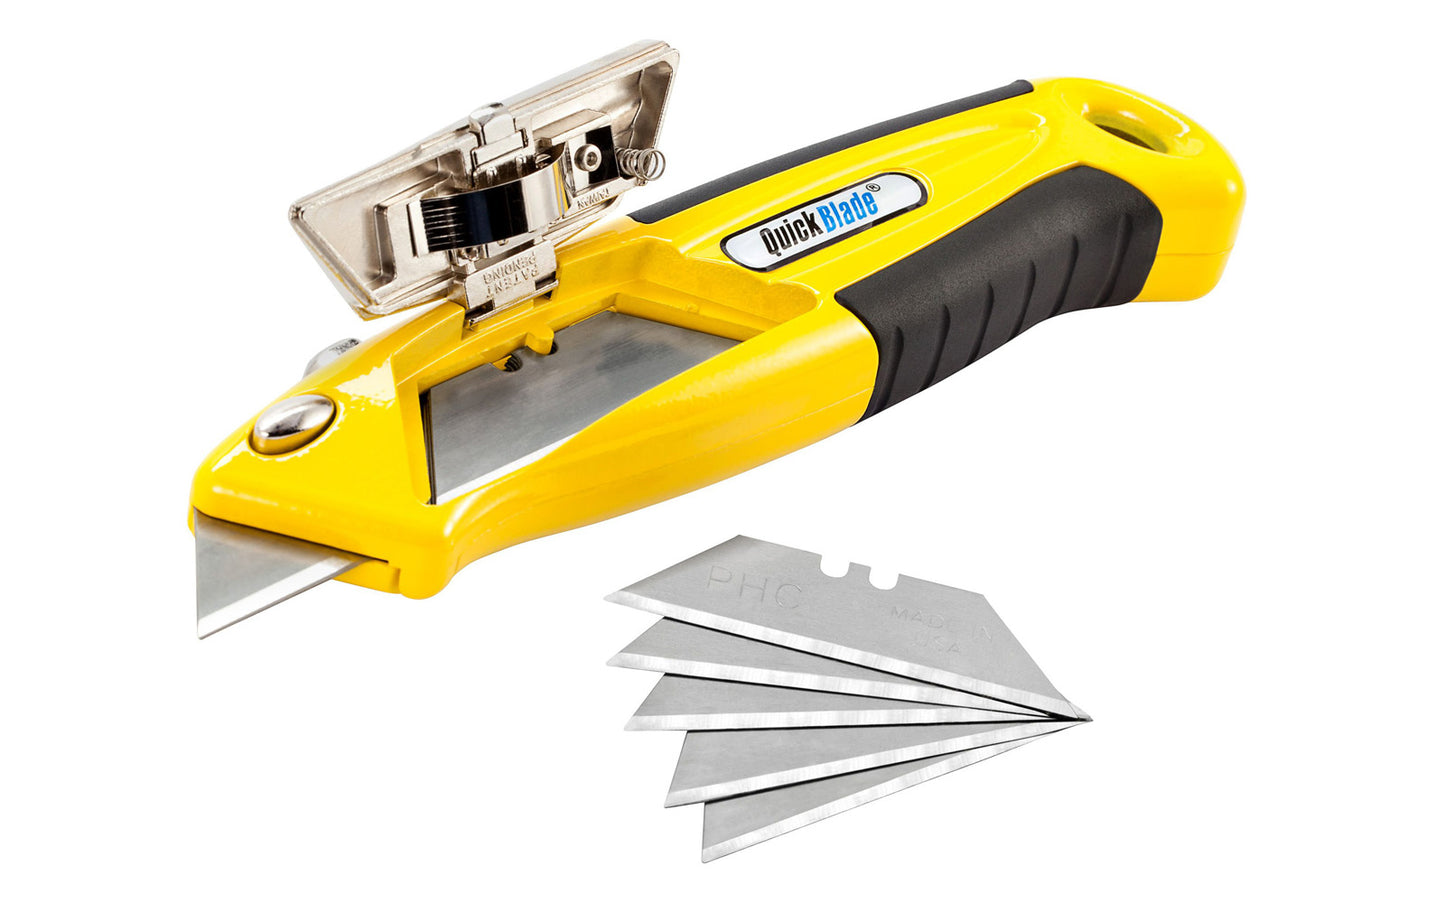 This Auto-Loading Metal Utility Knife has an unique auto-loading design & sturdy construction. Features a one-button automatic blade change that comes pre-loaded with five additional blades which can be easily engaged at anytime. Retractable knife. 073441003756. Model QBA-375 knife. PHC - Pacific Handy Cutter.